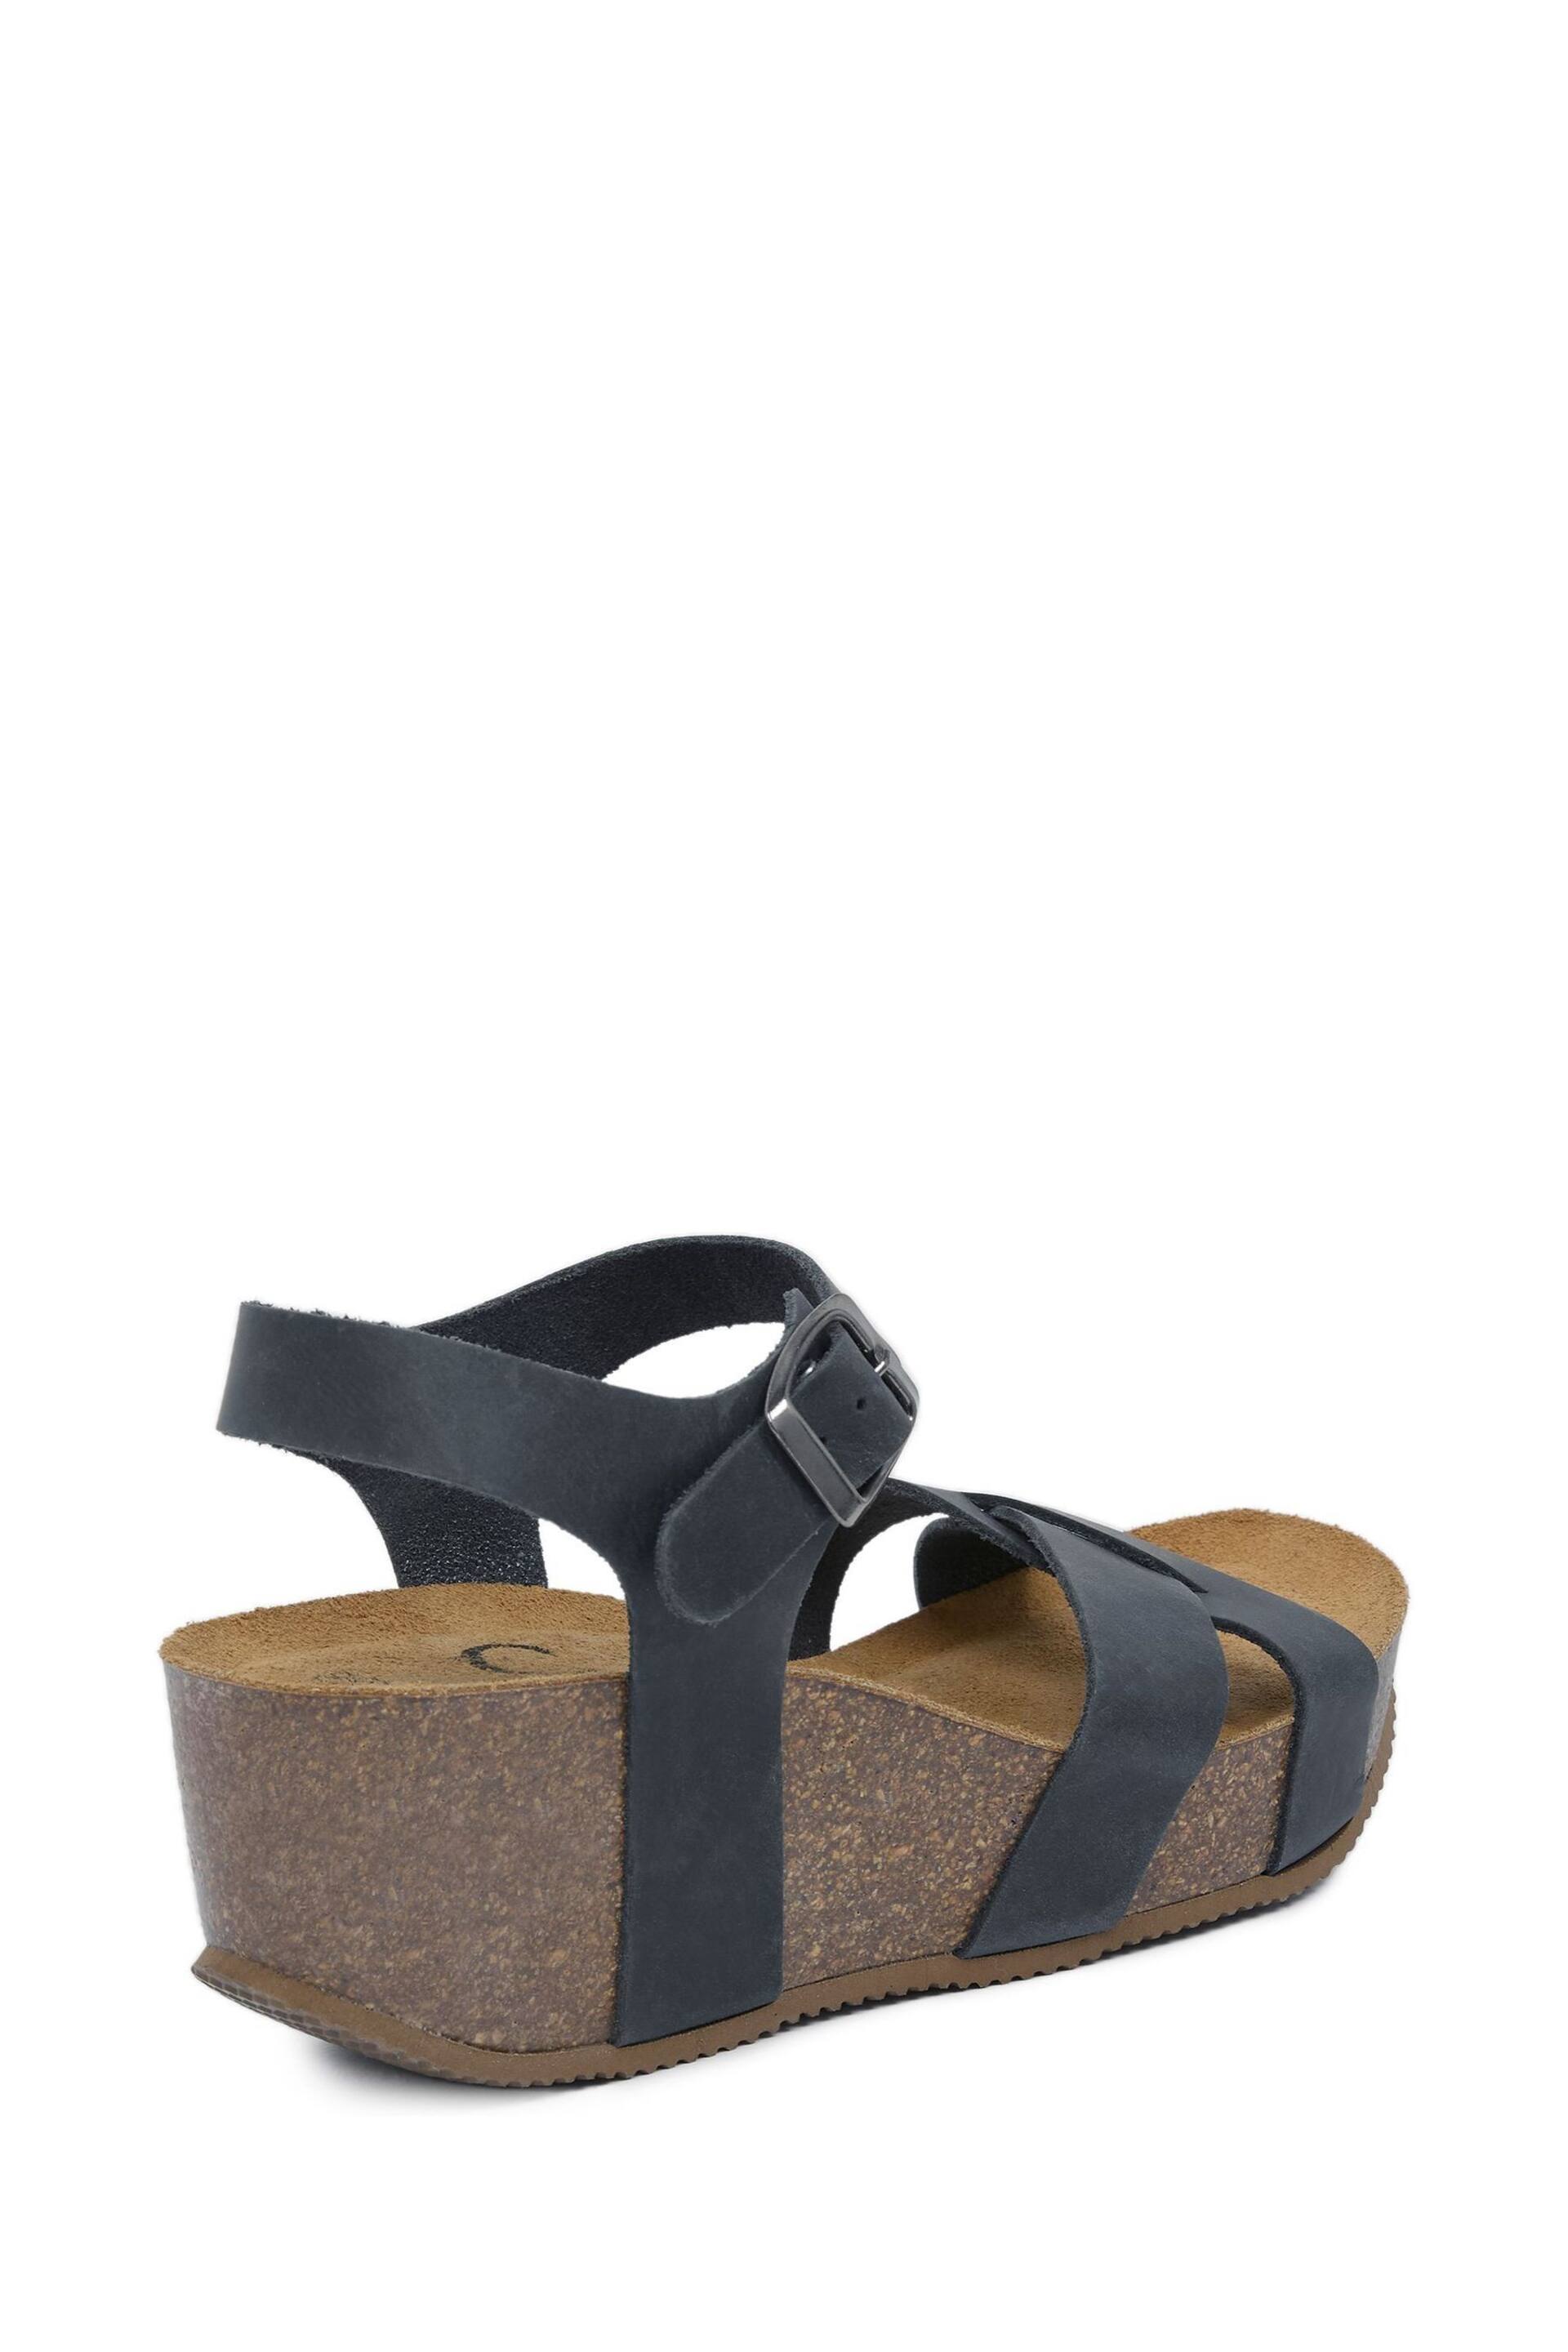 Celtic & Co. Blue Crossover Wedge Sandals - Image 4 of 7